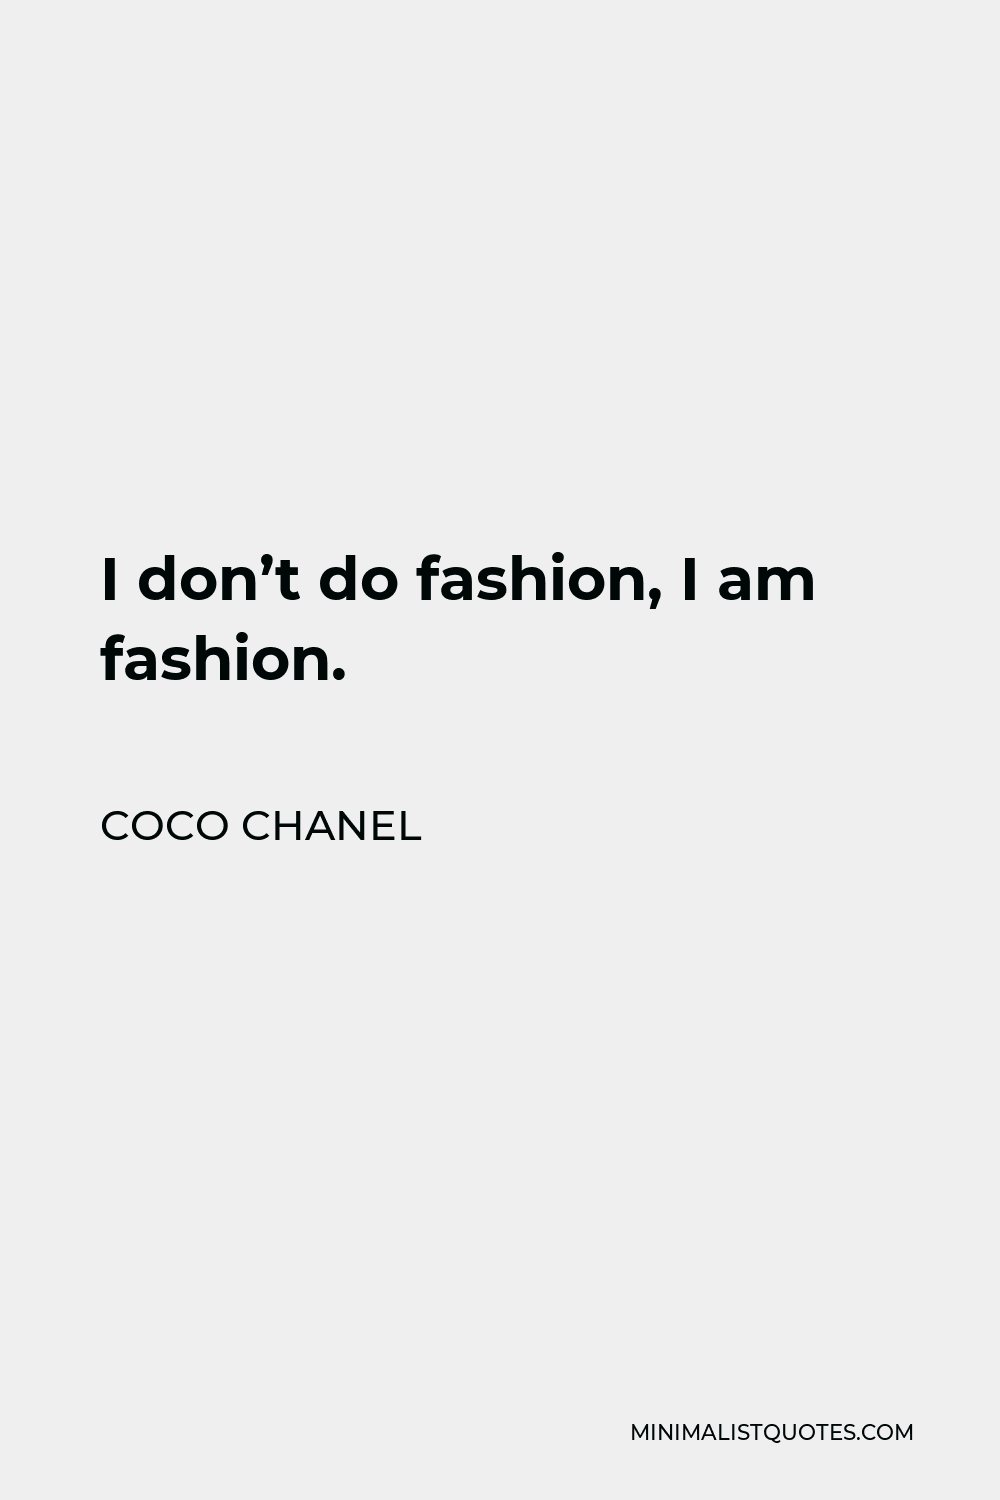 I Dont Do Fashion I Am Fashion Coco Chanel Quote  scented candle gift  designed by Toni Scott on Art Wow